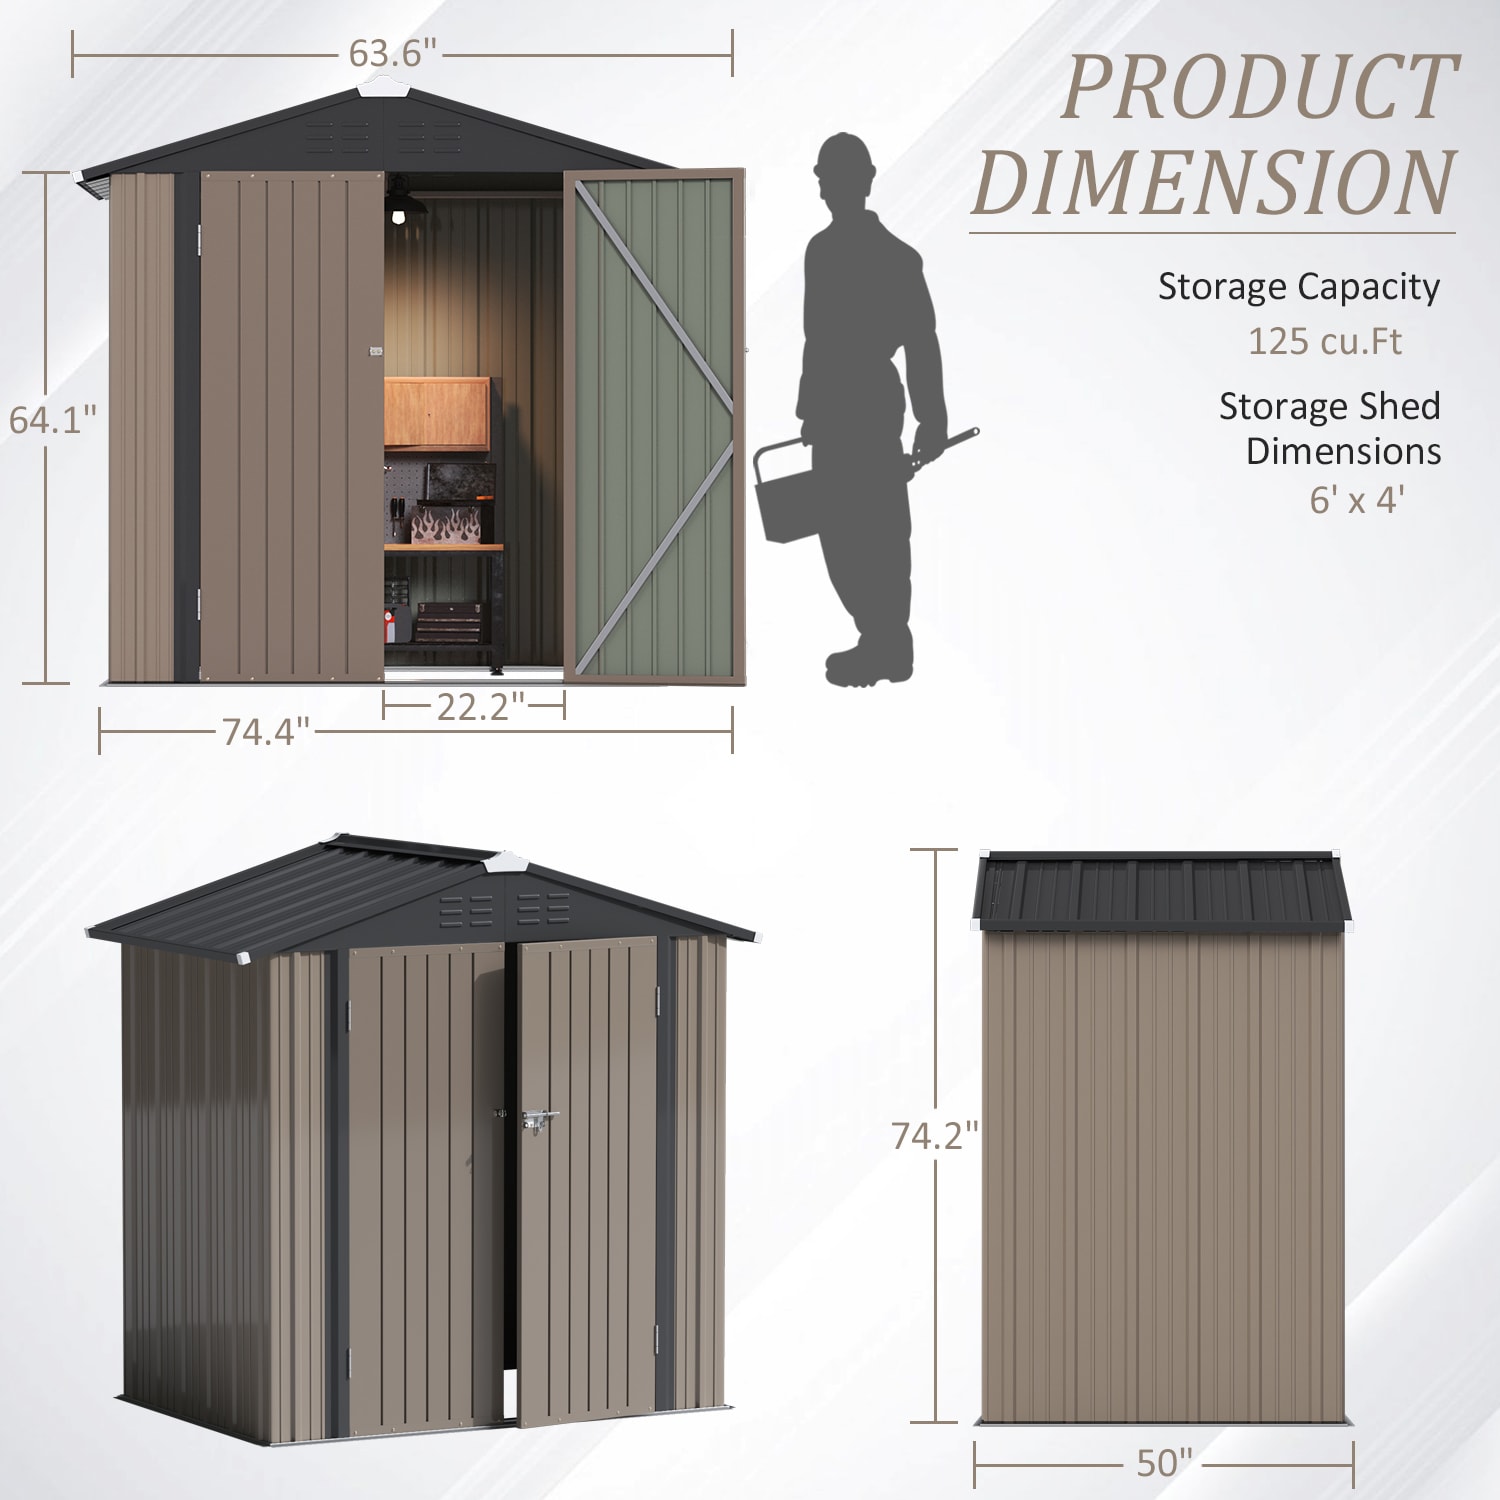 Vineego 6-ft x 4-ft PSS0BN Galvanized Steel Storage Shed in the Metal ...